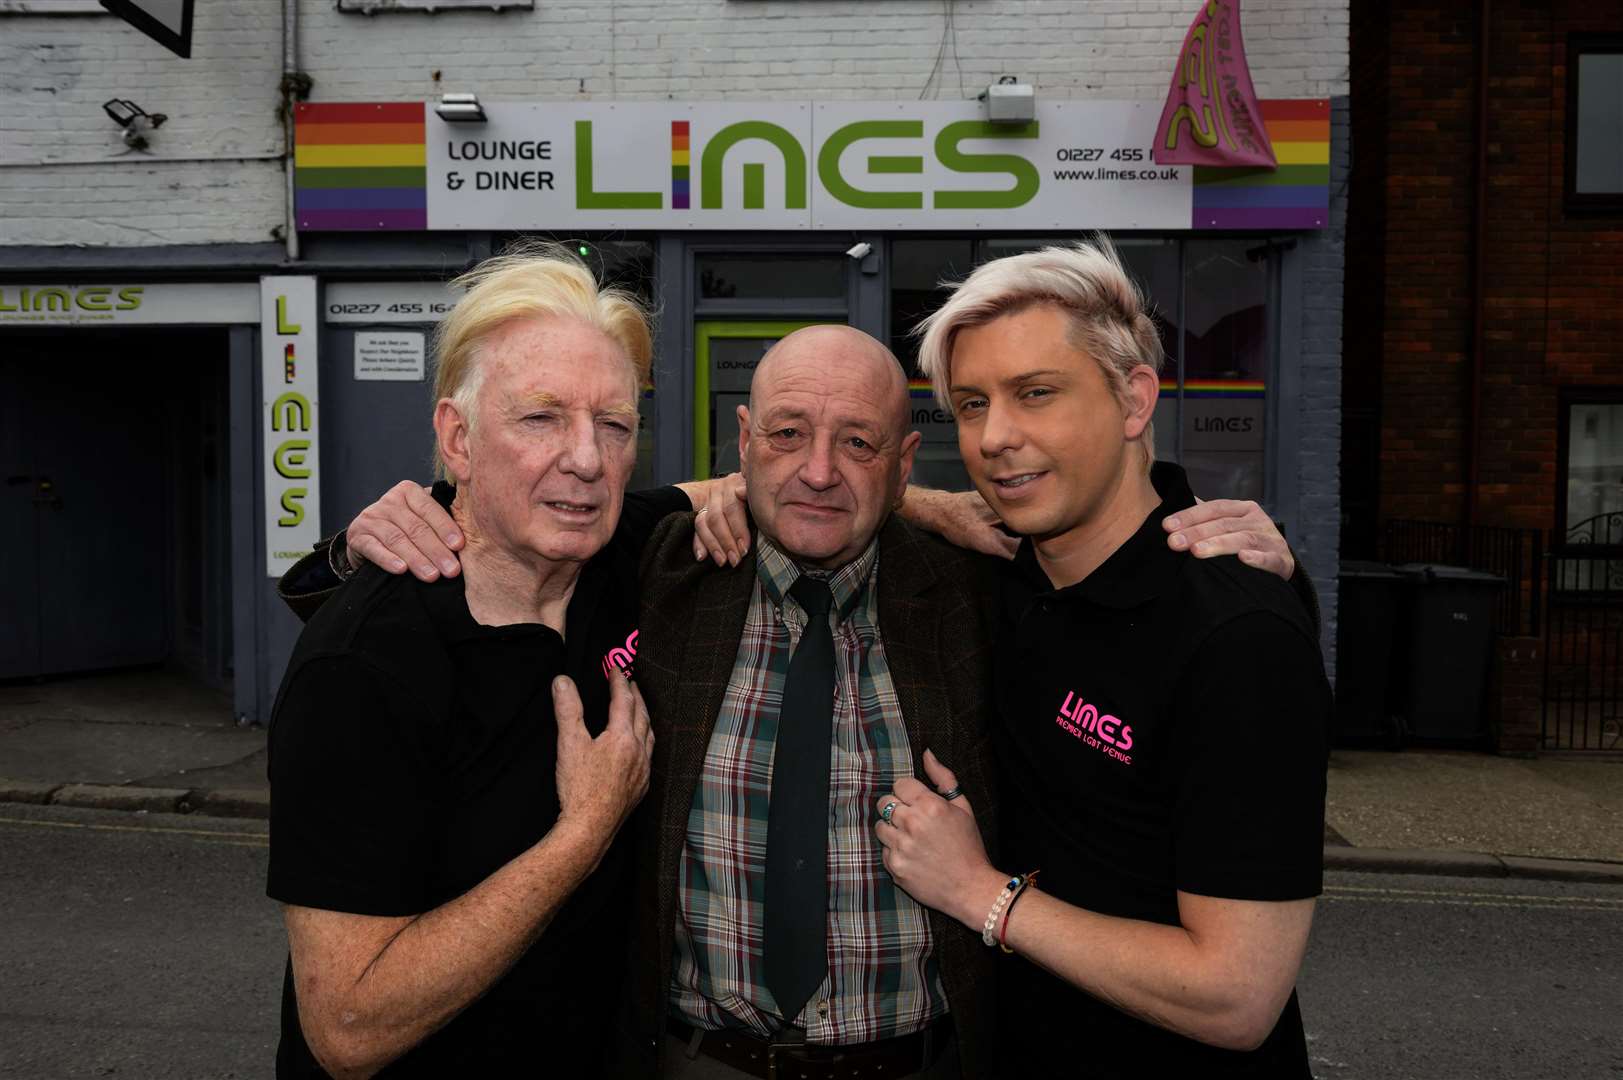 From left, bar owner Tony Butcher, Vince and landlord Mikey Lee